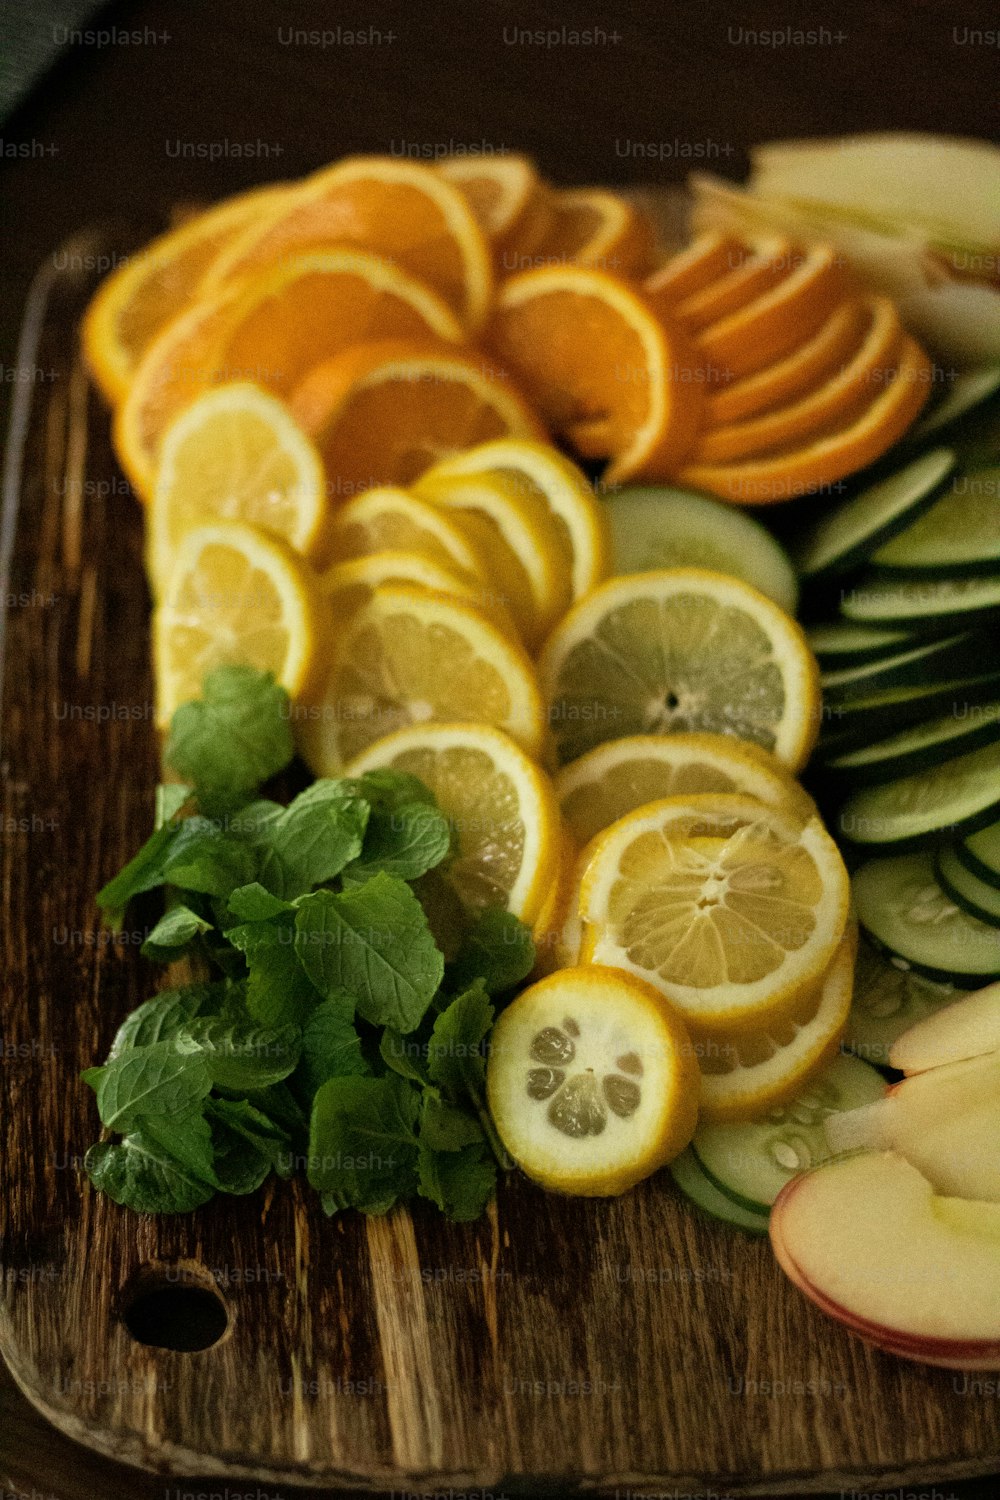 a cutting board topped with sliced oranges and cucumbers